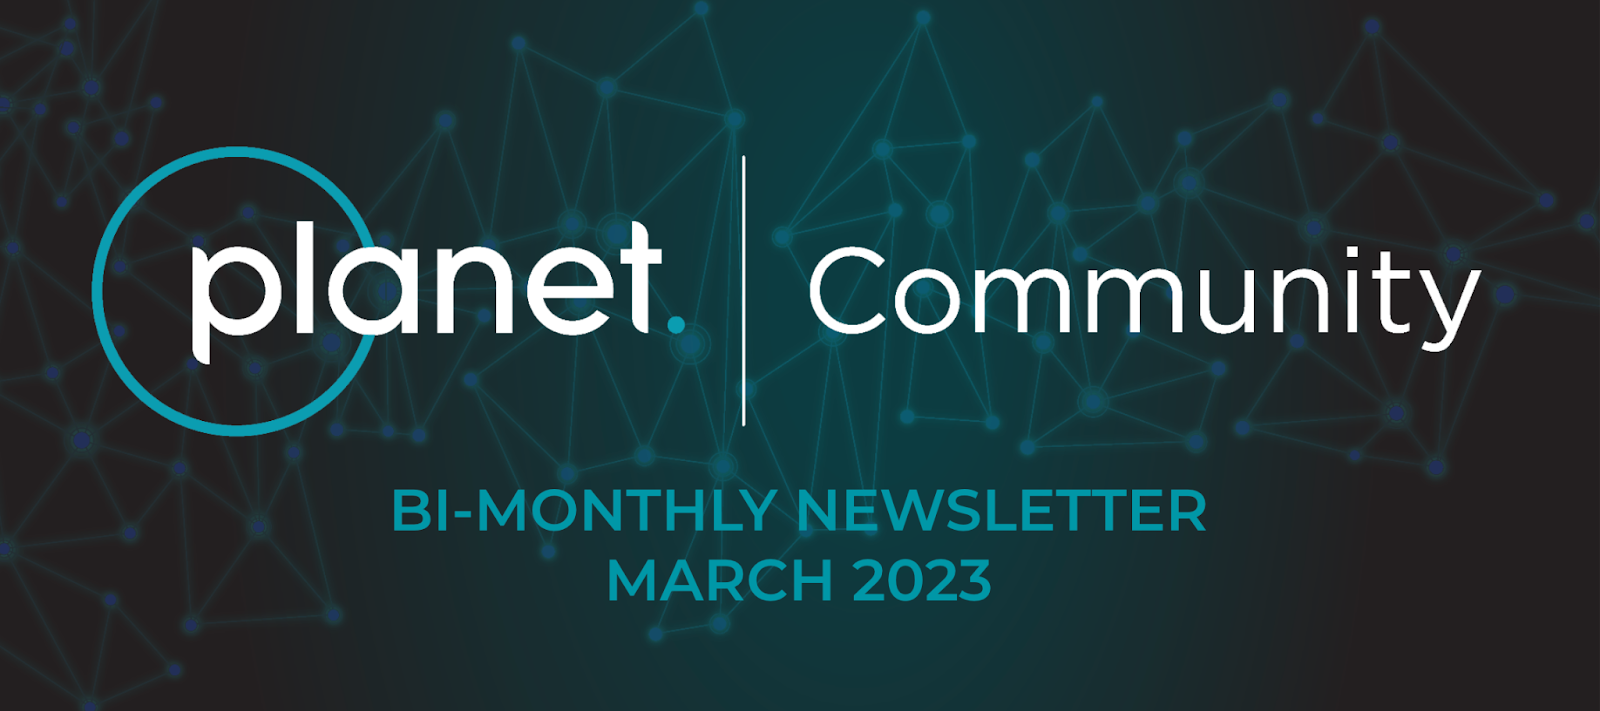 📰Planet Community Newsletter- March 2023📰